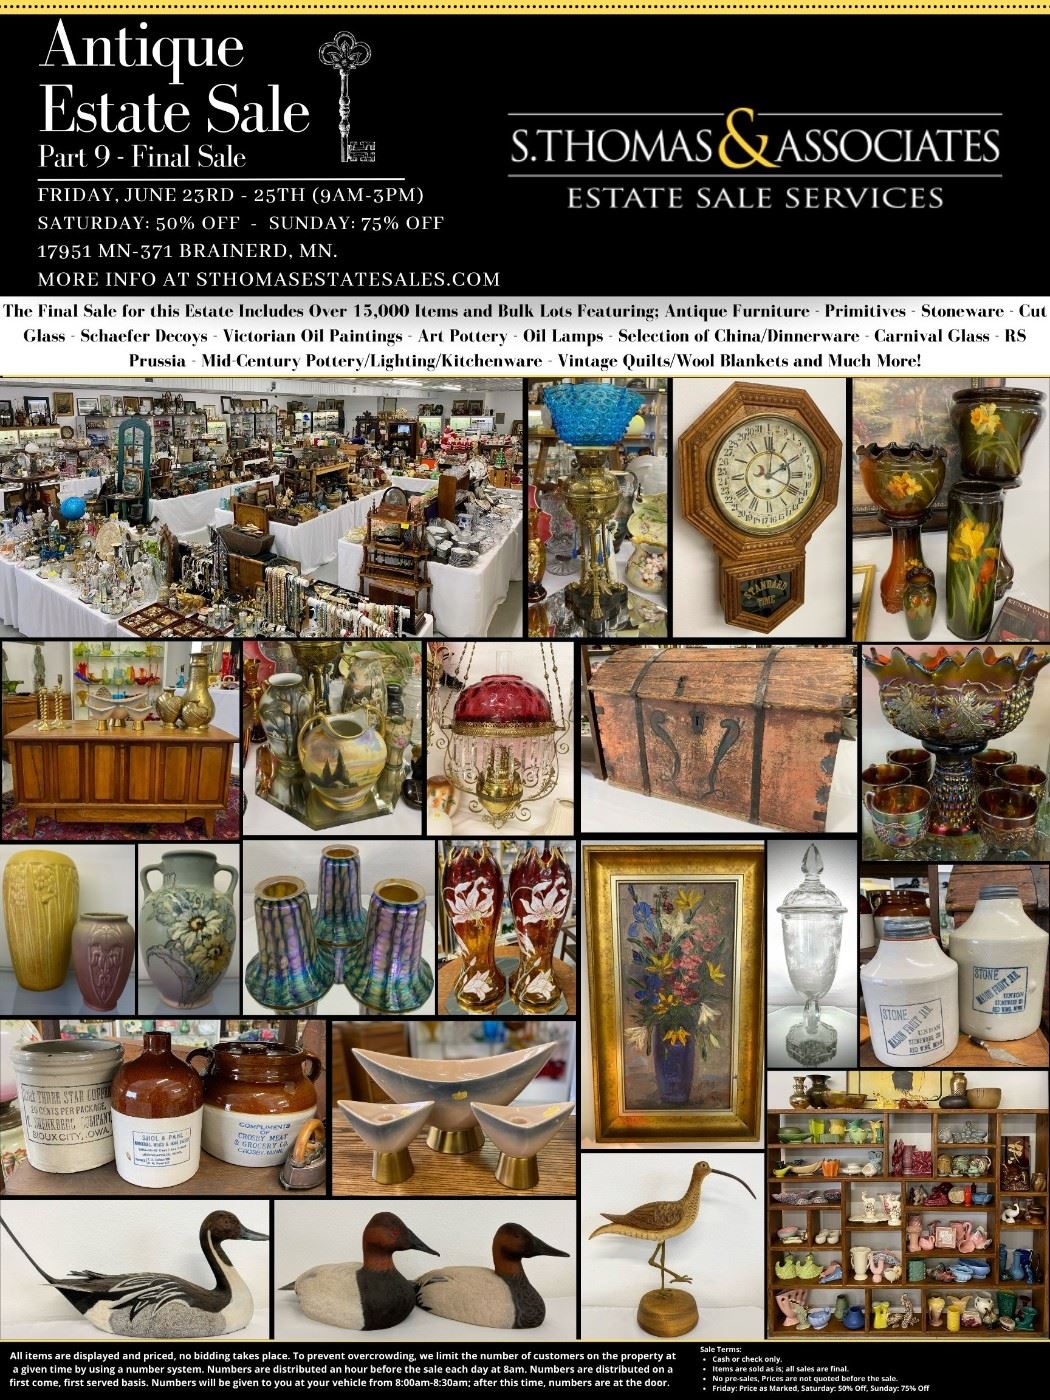 The Final Sale for this Estate Includes Over 15,000 Items and Bulk Lots Featuring; Antique Furniture - Primitives - Stoneware - Cut Glass - Schaefer Decoys - Victorian Oil Paintings - Art Pottery - Oil Lamps - Selection of China/Dinnerware - Carnival Glass - RS Prussia - Mid-Century Pottery/Lighting/Kitchenware - Vintage Quilts/Wool Blankets and Much More!